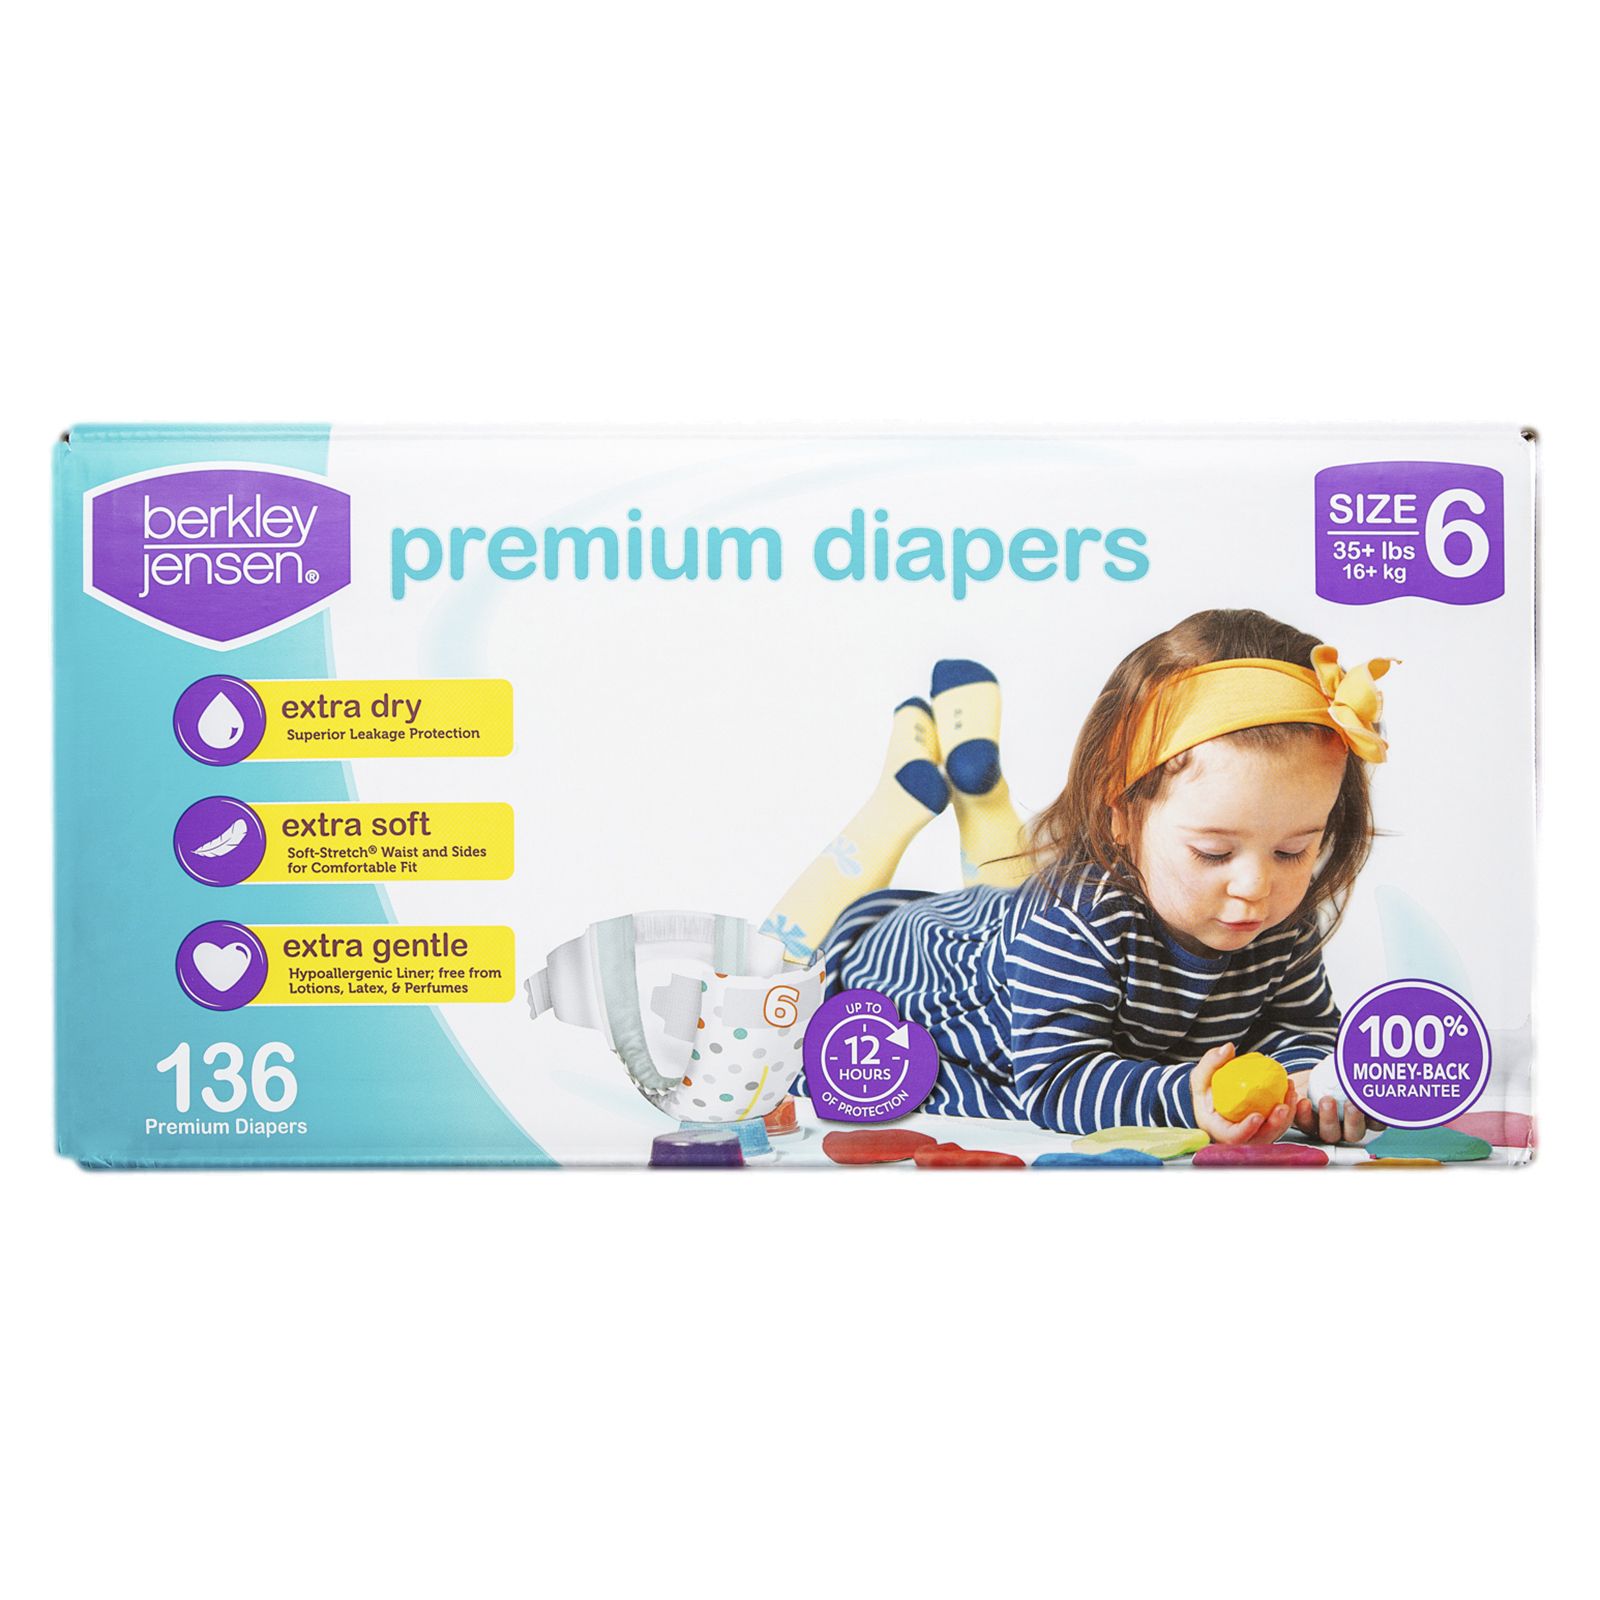 Diaper Deals - Save Buying Bulk and Free Shipping